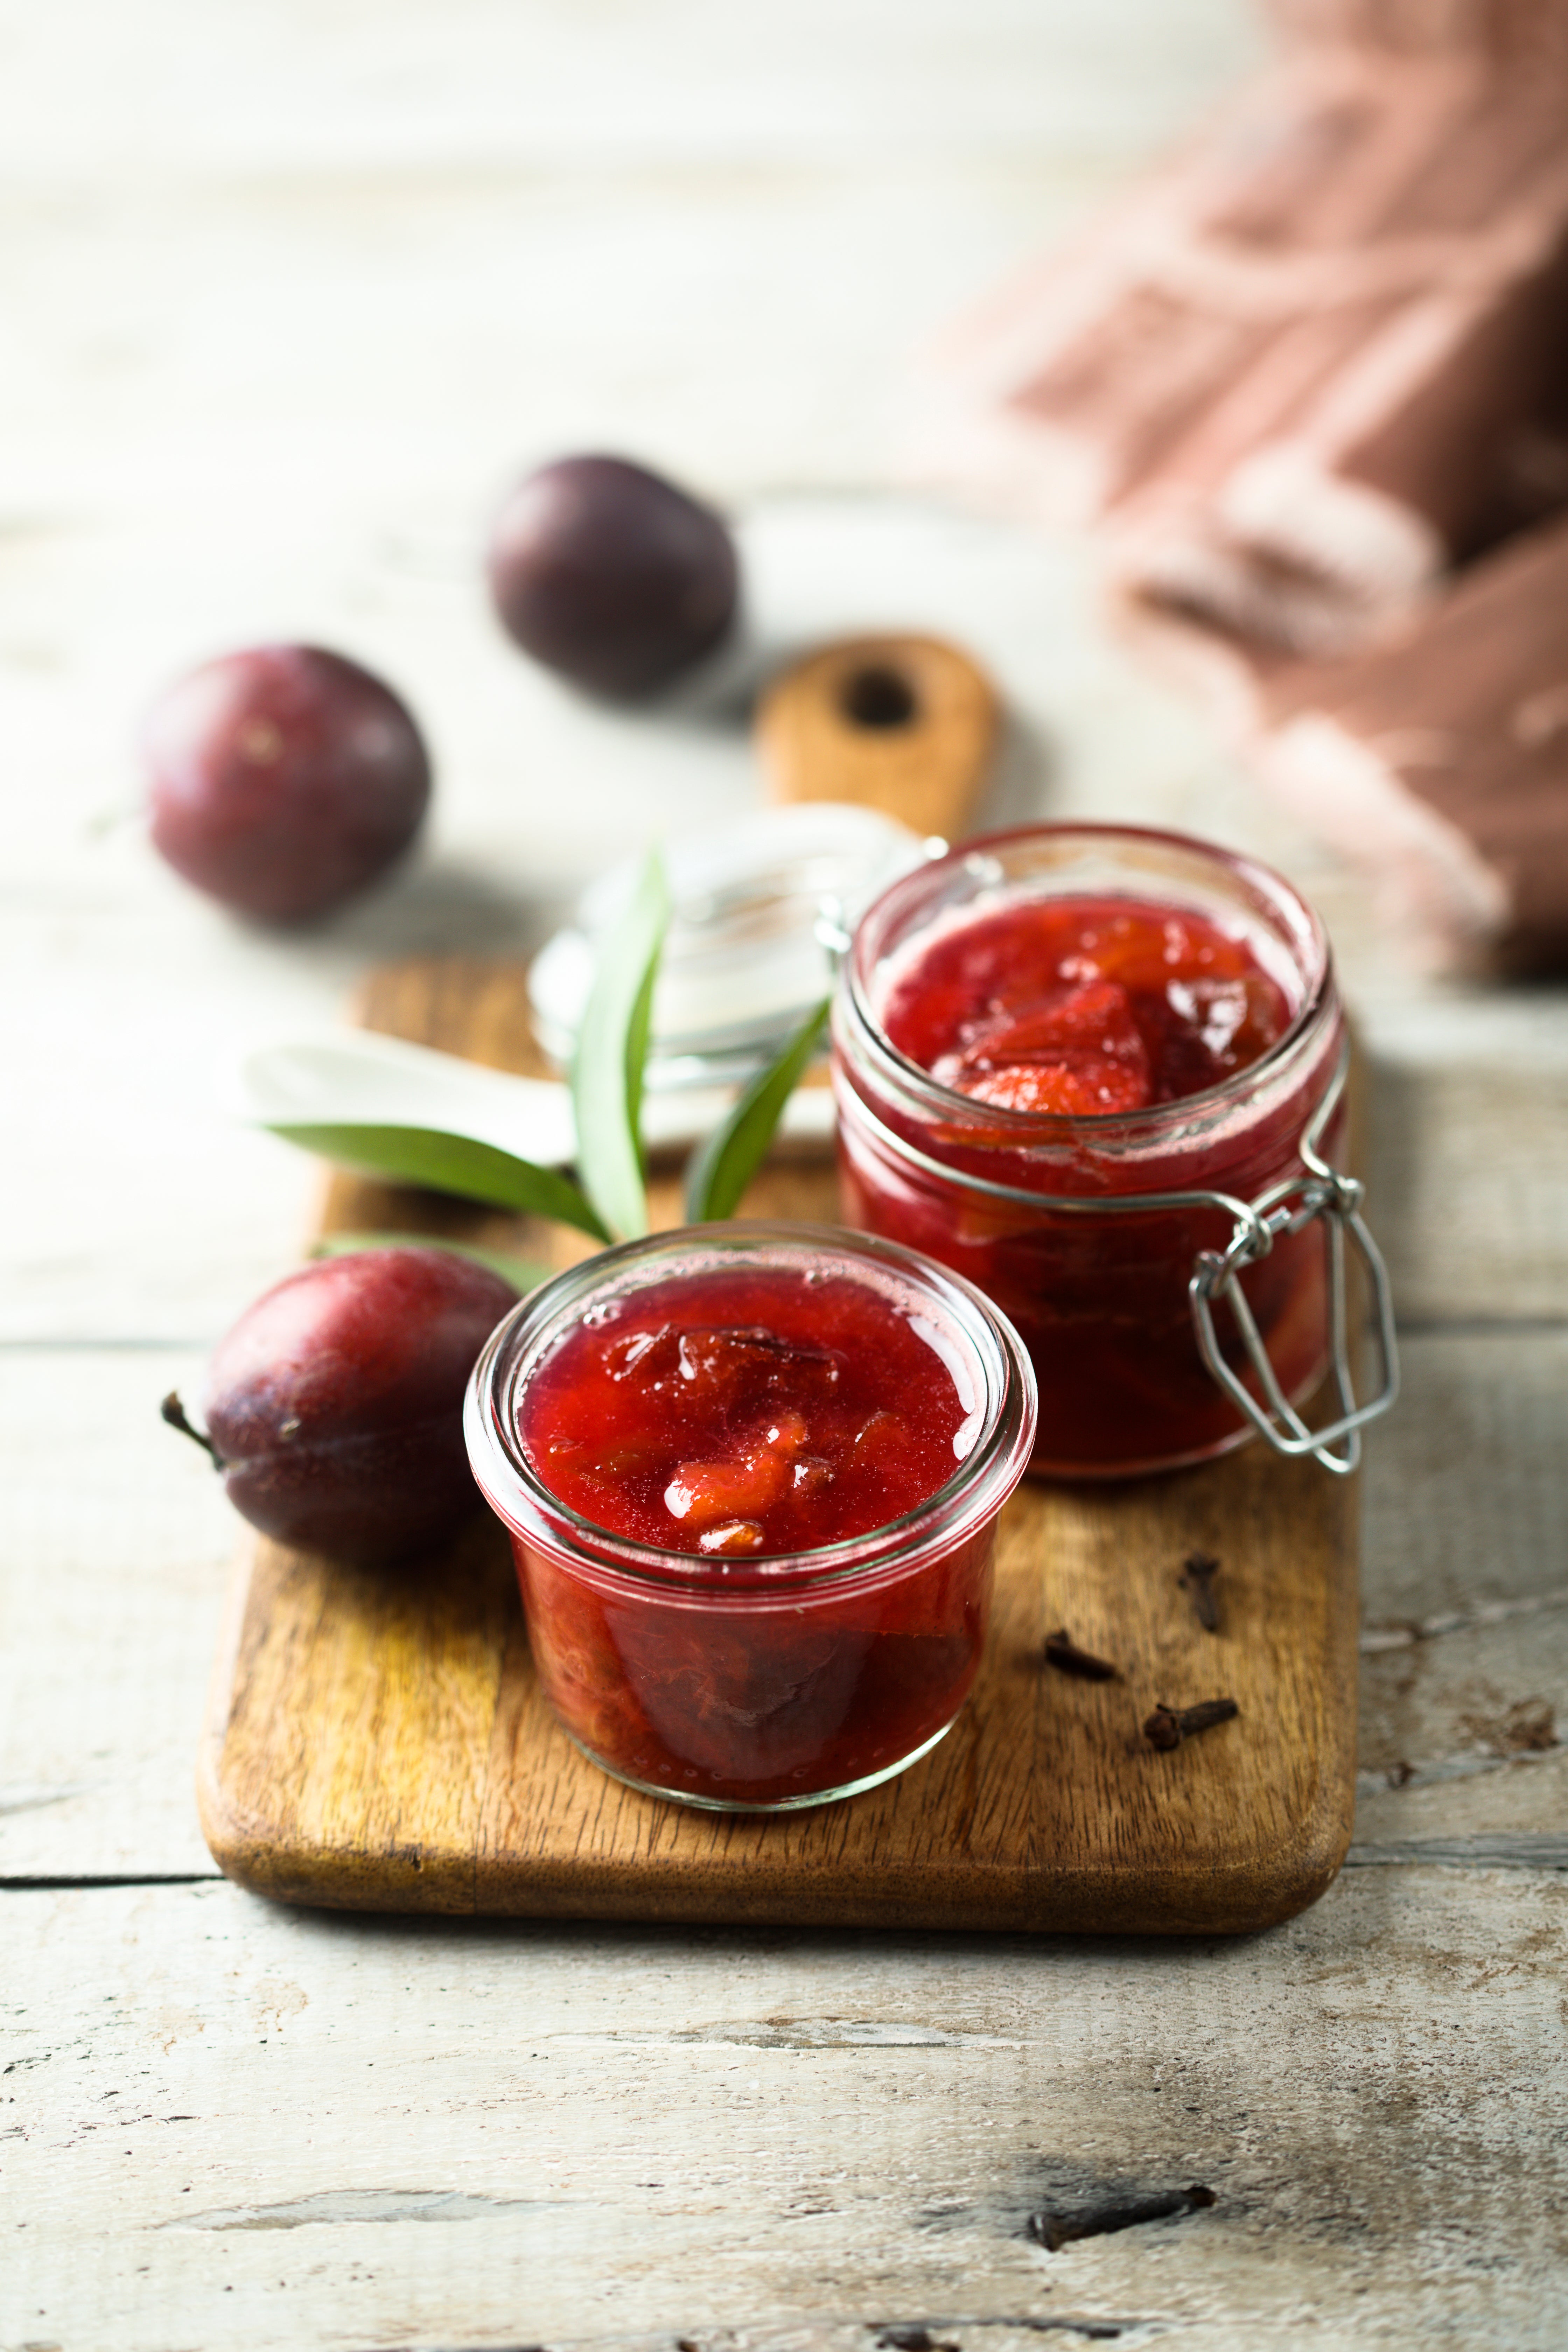 Bite into your plums before making this no-cook preserve to ensure you have the boldest flavours